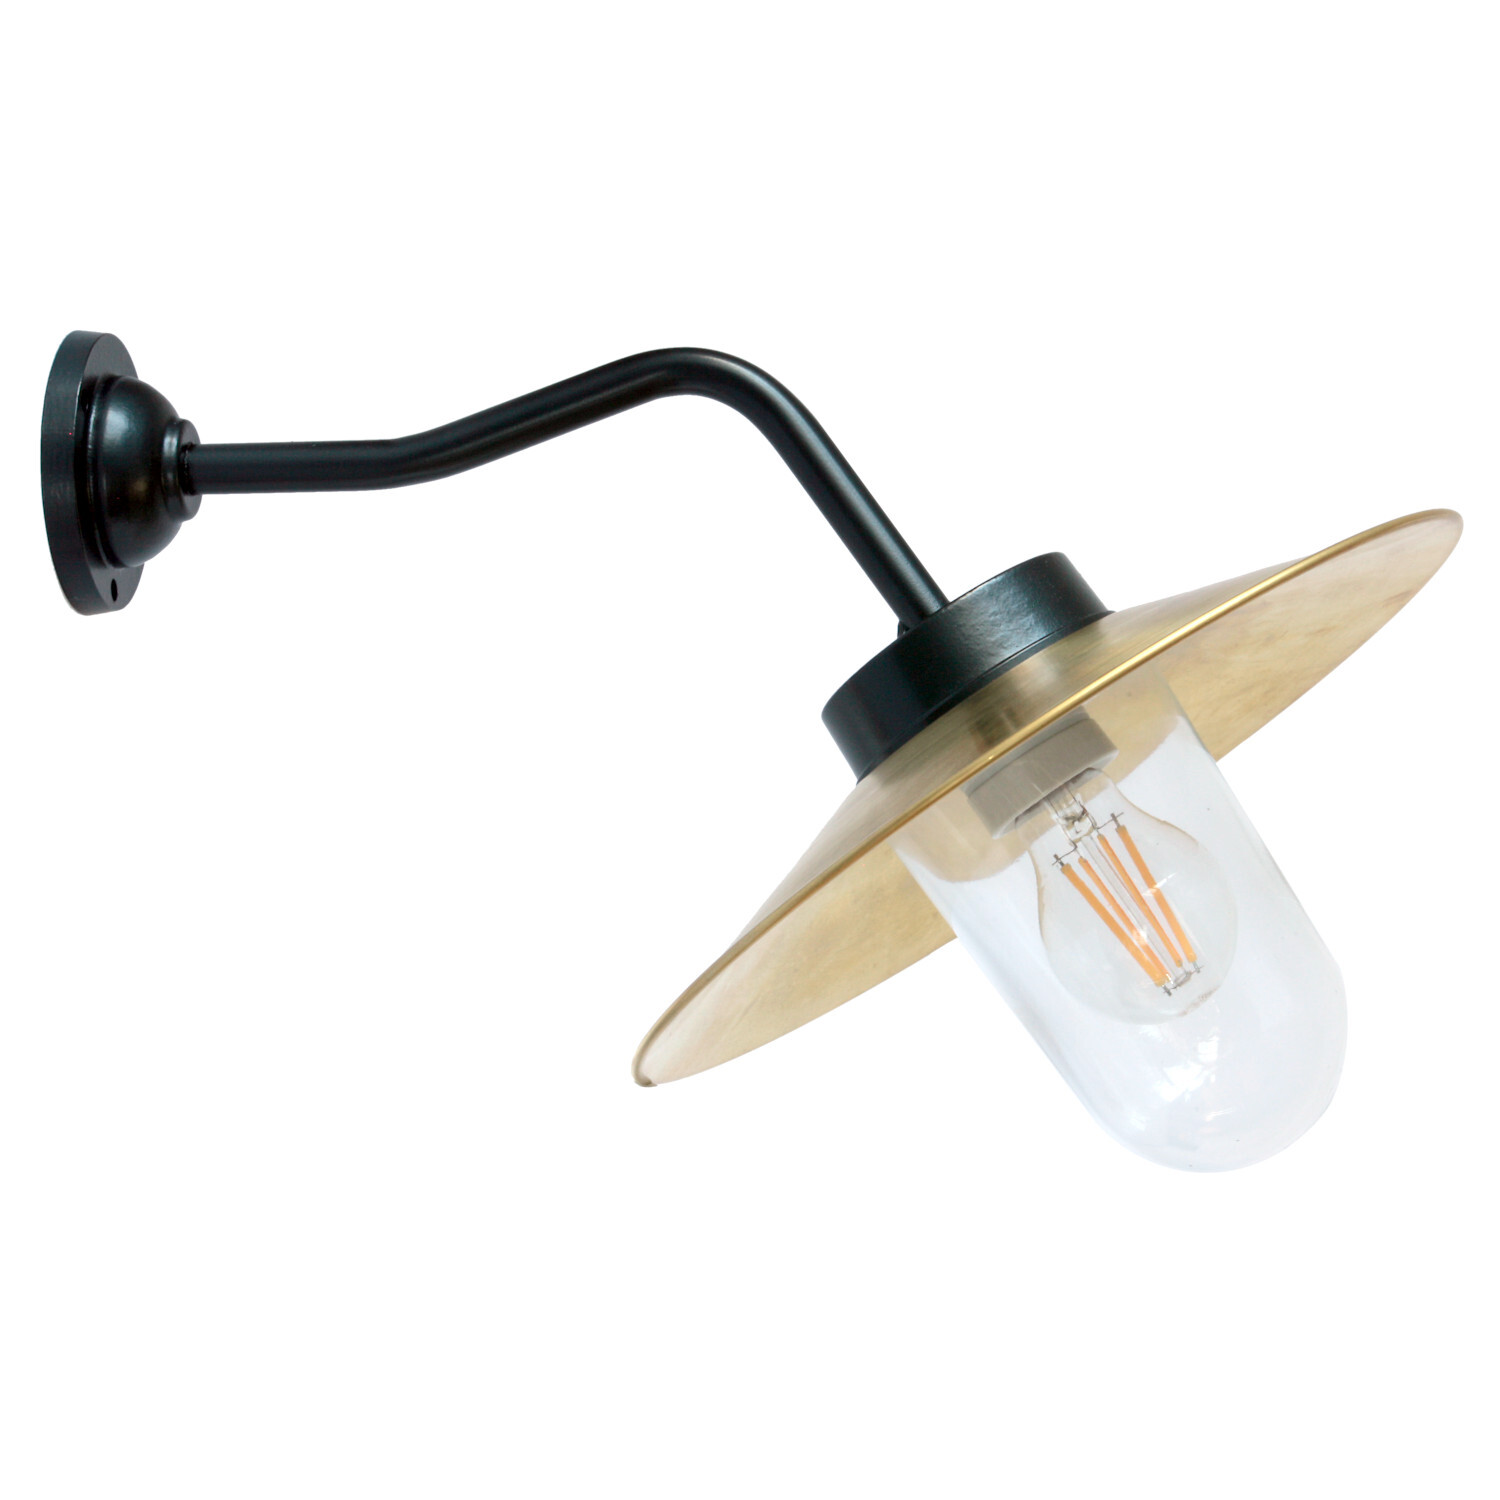 Classical Barn Lamp 38-45 BR-S with Brass Shade